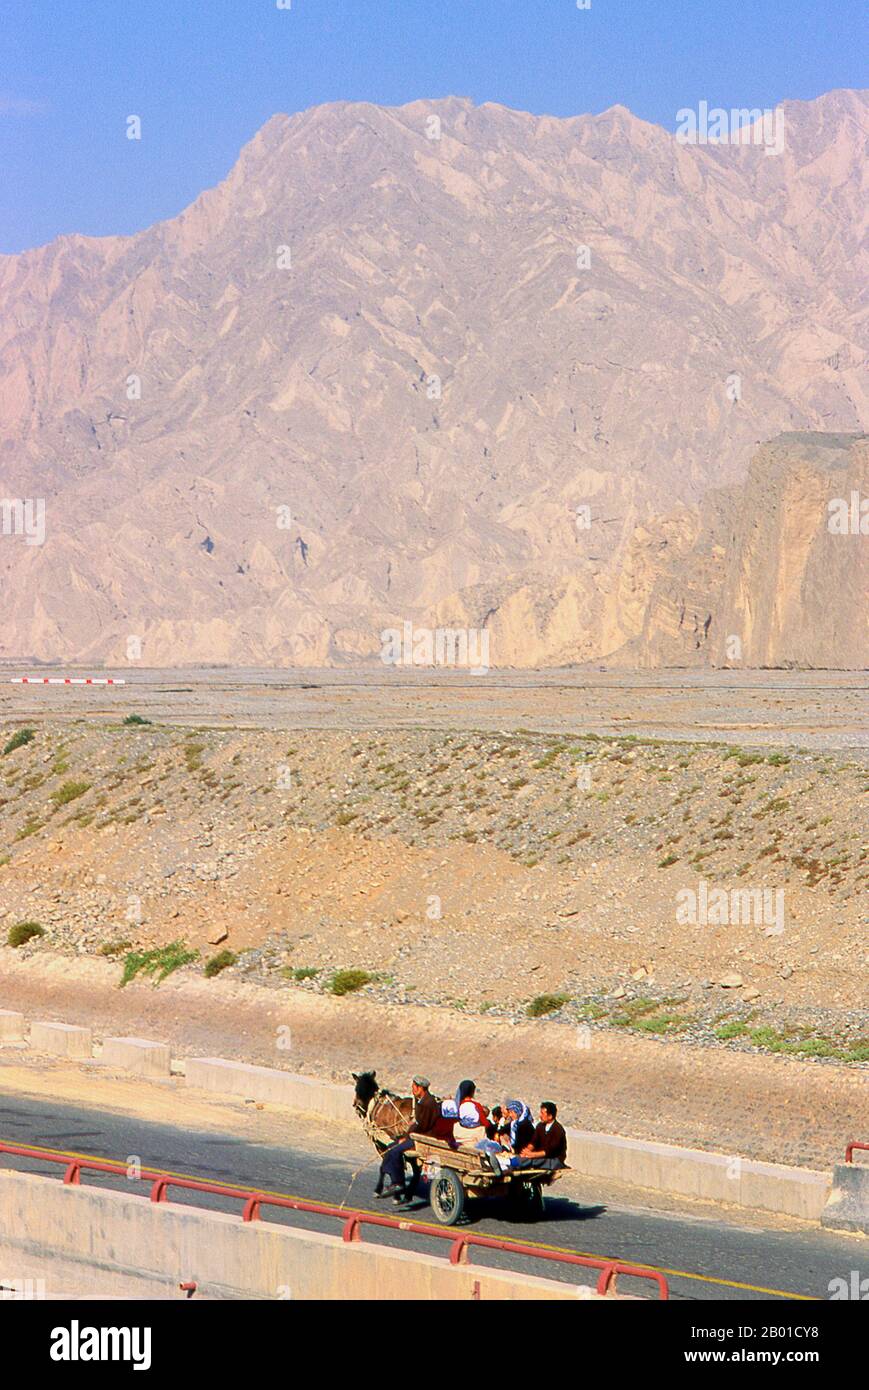 China: Horse-drawn cart next to the Subashi Ancient City (Subashi Gucheng), Kuqa, Xinjiang Province.  The ruins of Subashi Gucheng (Subashi Ancient City) are all that is left of the ancient capital of the Kingdom of Qiuci that existed from the 4th century AD until it was abandoned sometime in the 12th century. Stock Photo